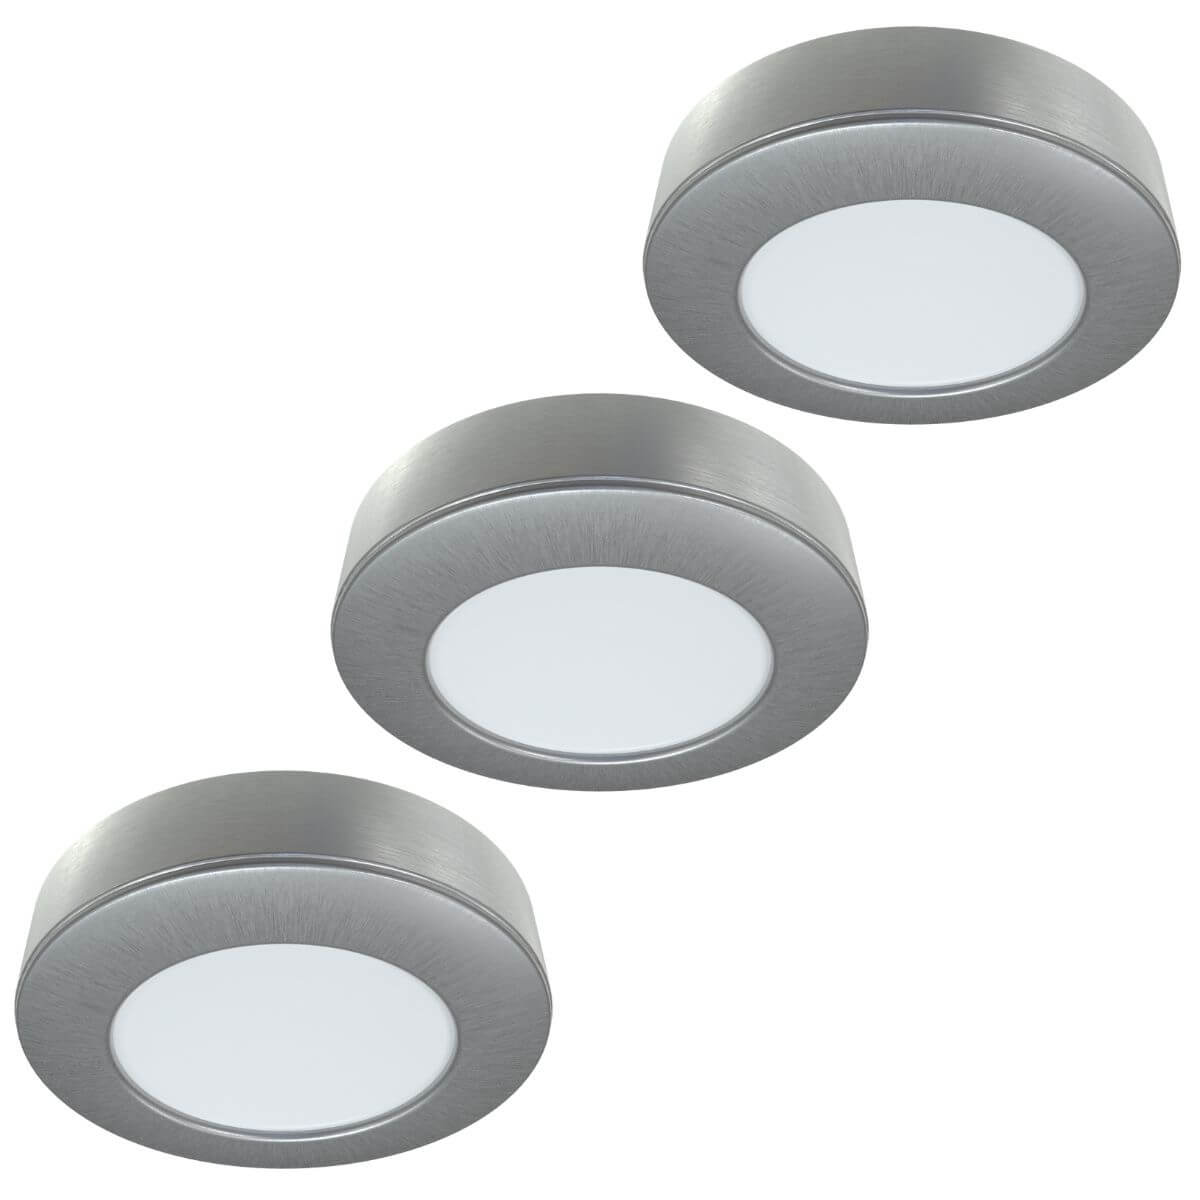 View Pack of 3 High Power Surface Mounted LED Under Cabinet Lights and Transformer information